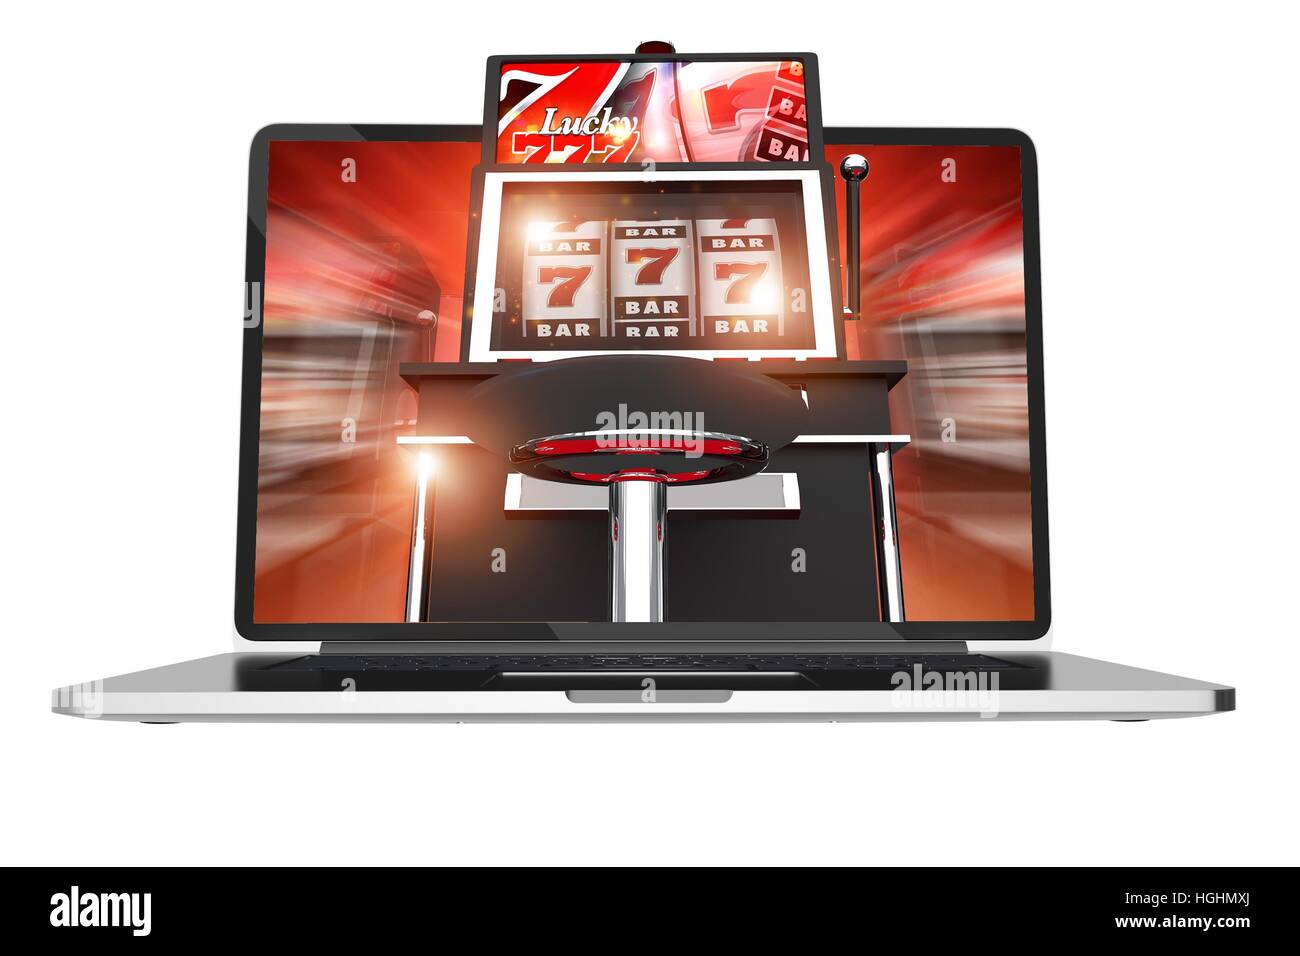 Online Slot Machine Games. Casino Online Concept 3D Render Illustration Isolated on White Background. One-Handed Bandit Slot Machine on the Computer S Stock Photo